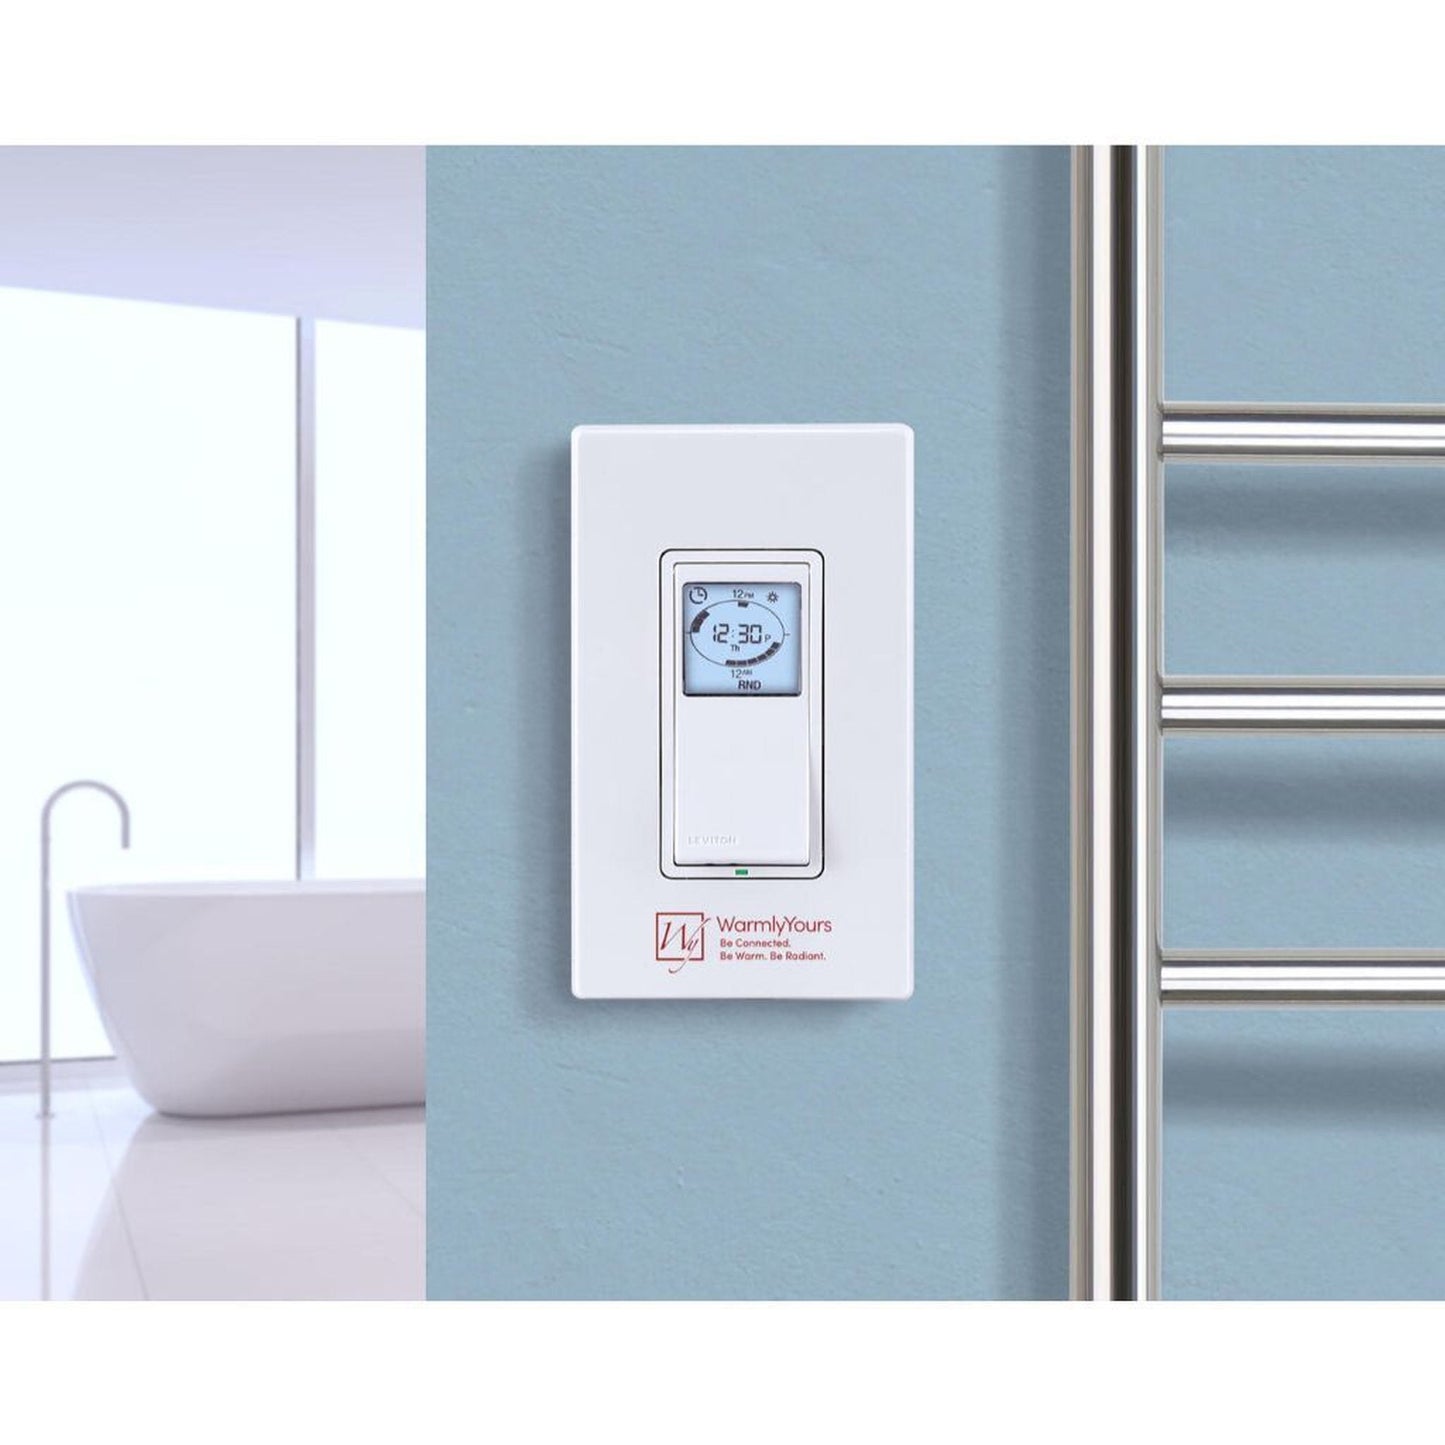 Hardwired Programmable Timer Towel Warmer Control